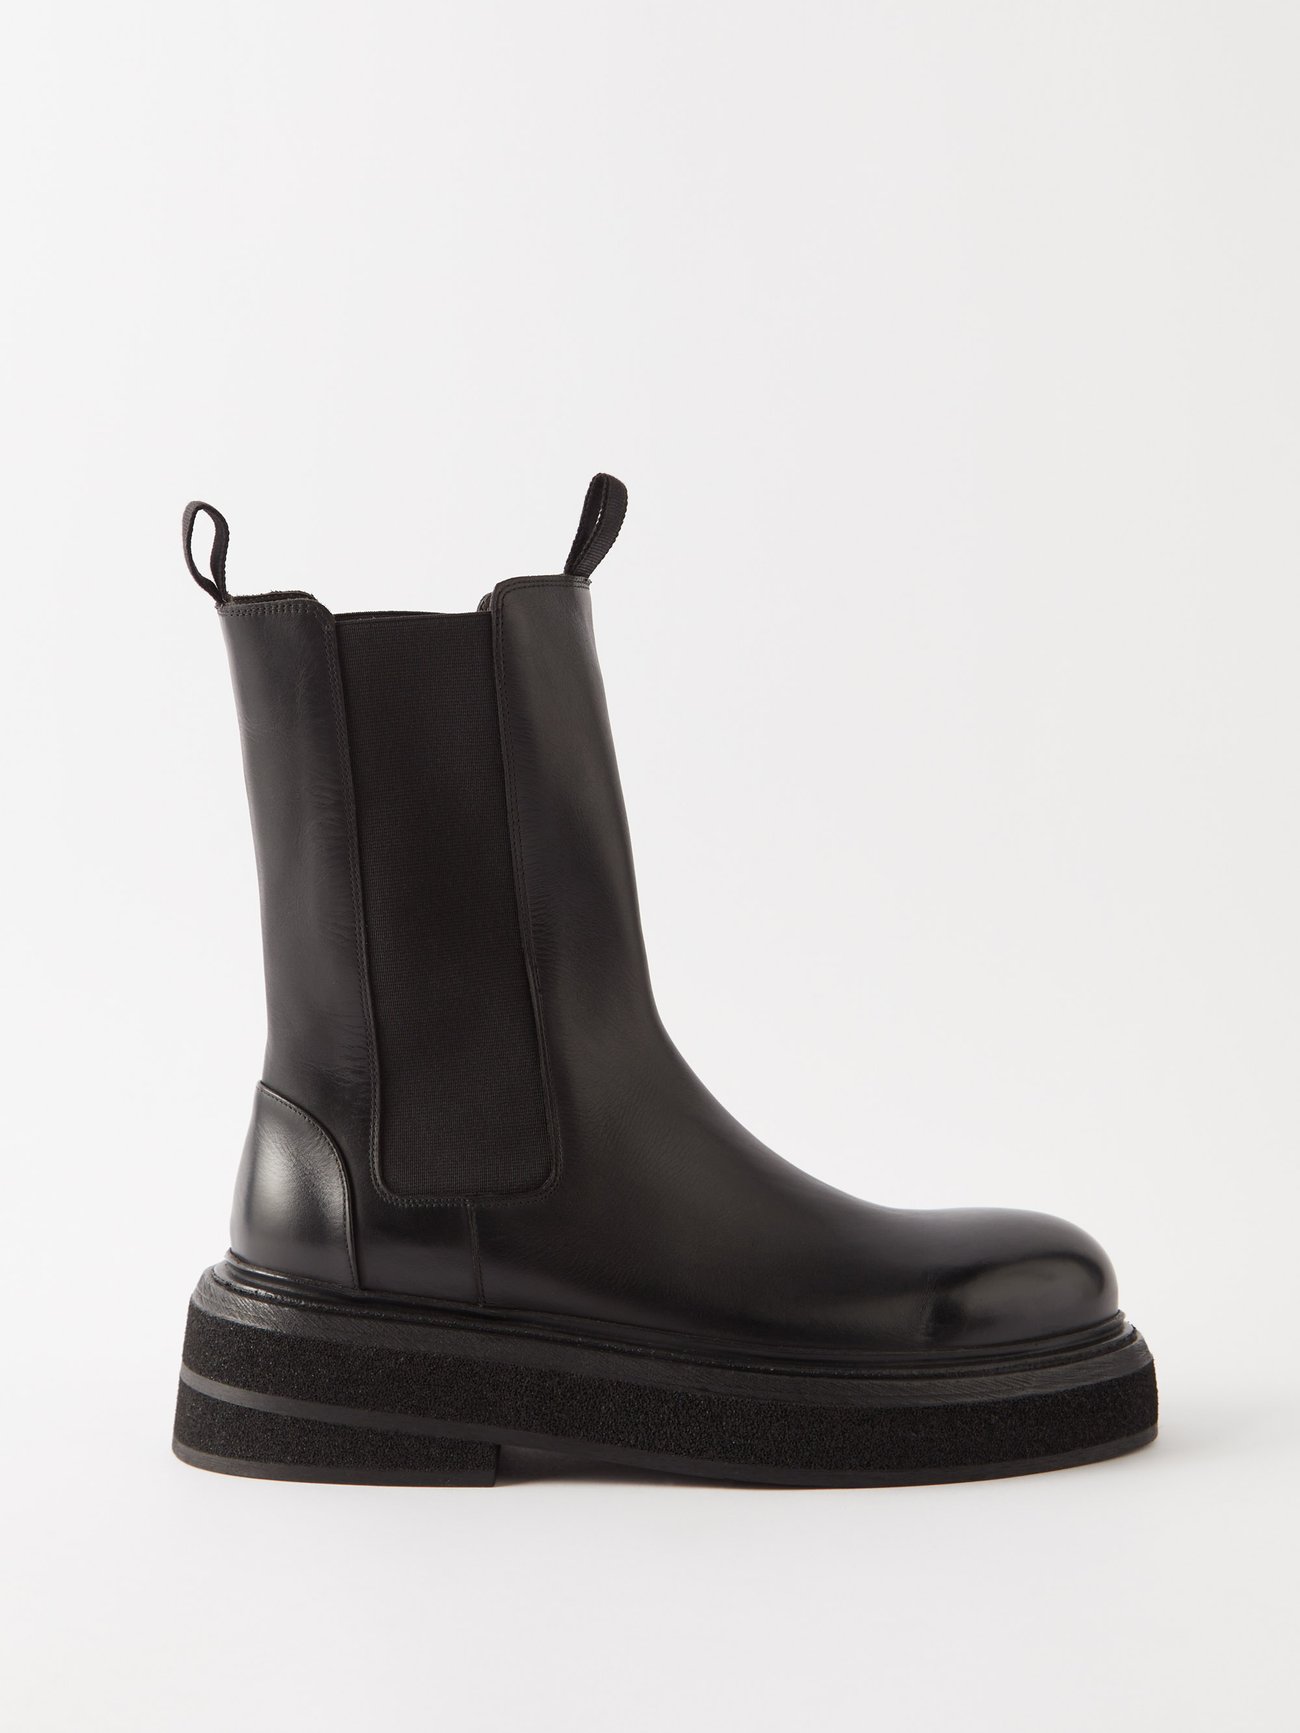 Chunky Chelsea Boots Trend: The Best For Every Budget | Who What Wear UK